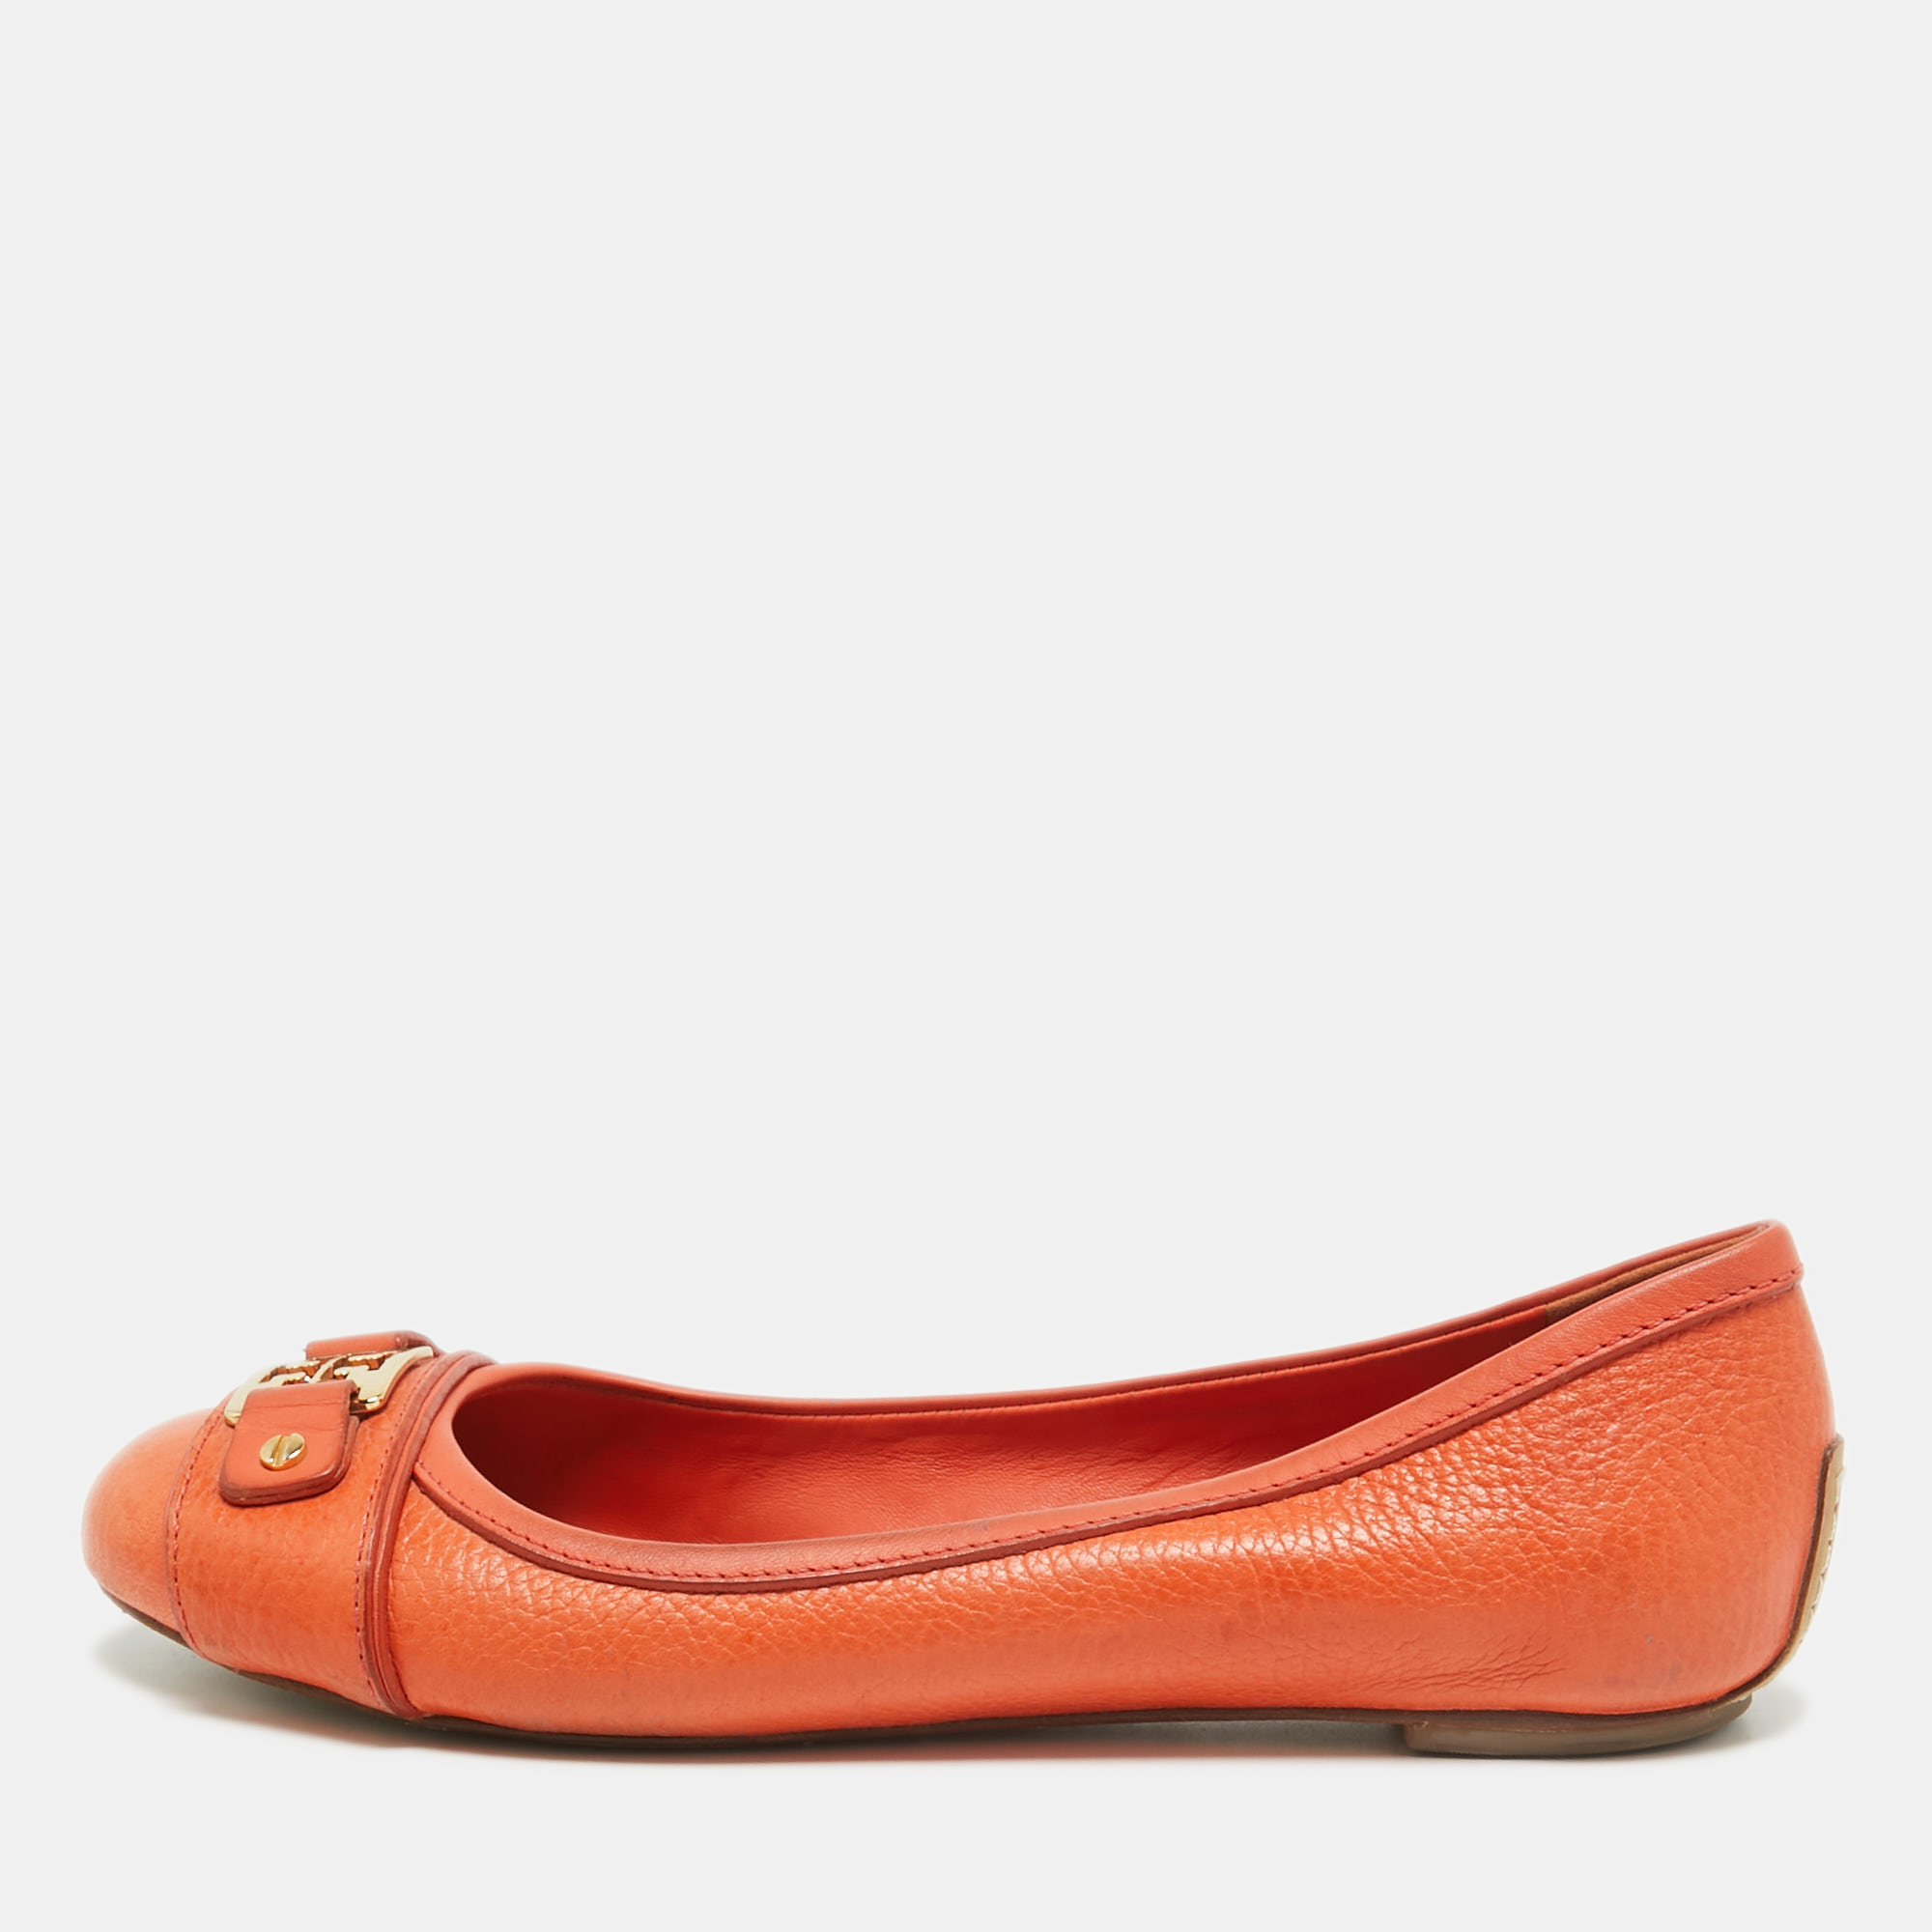 Pre-owned Tory Burch Orange Leather Cline Ballet Flats Size 38.5